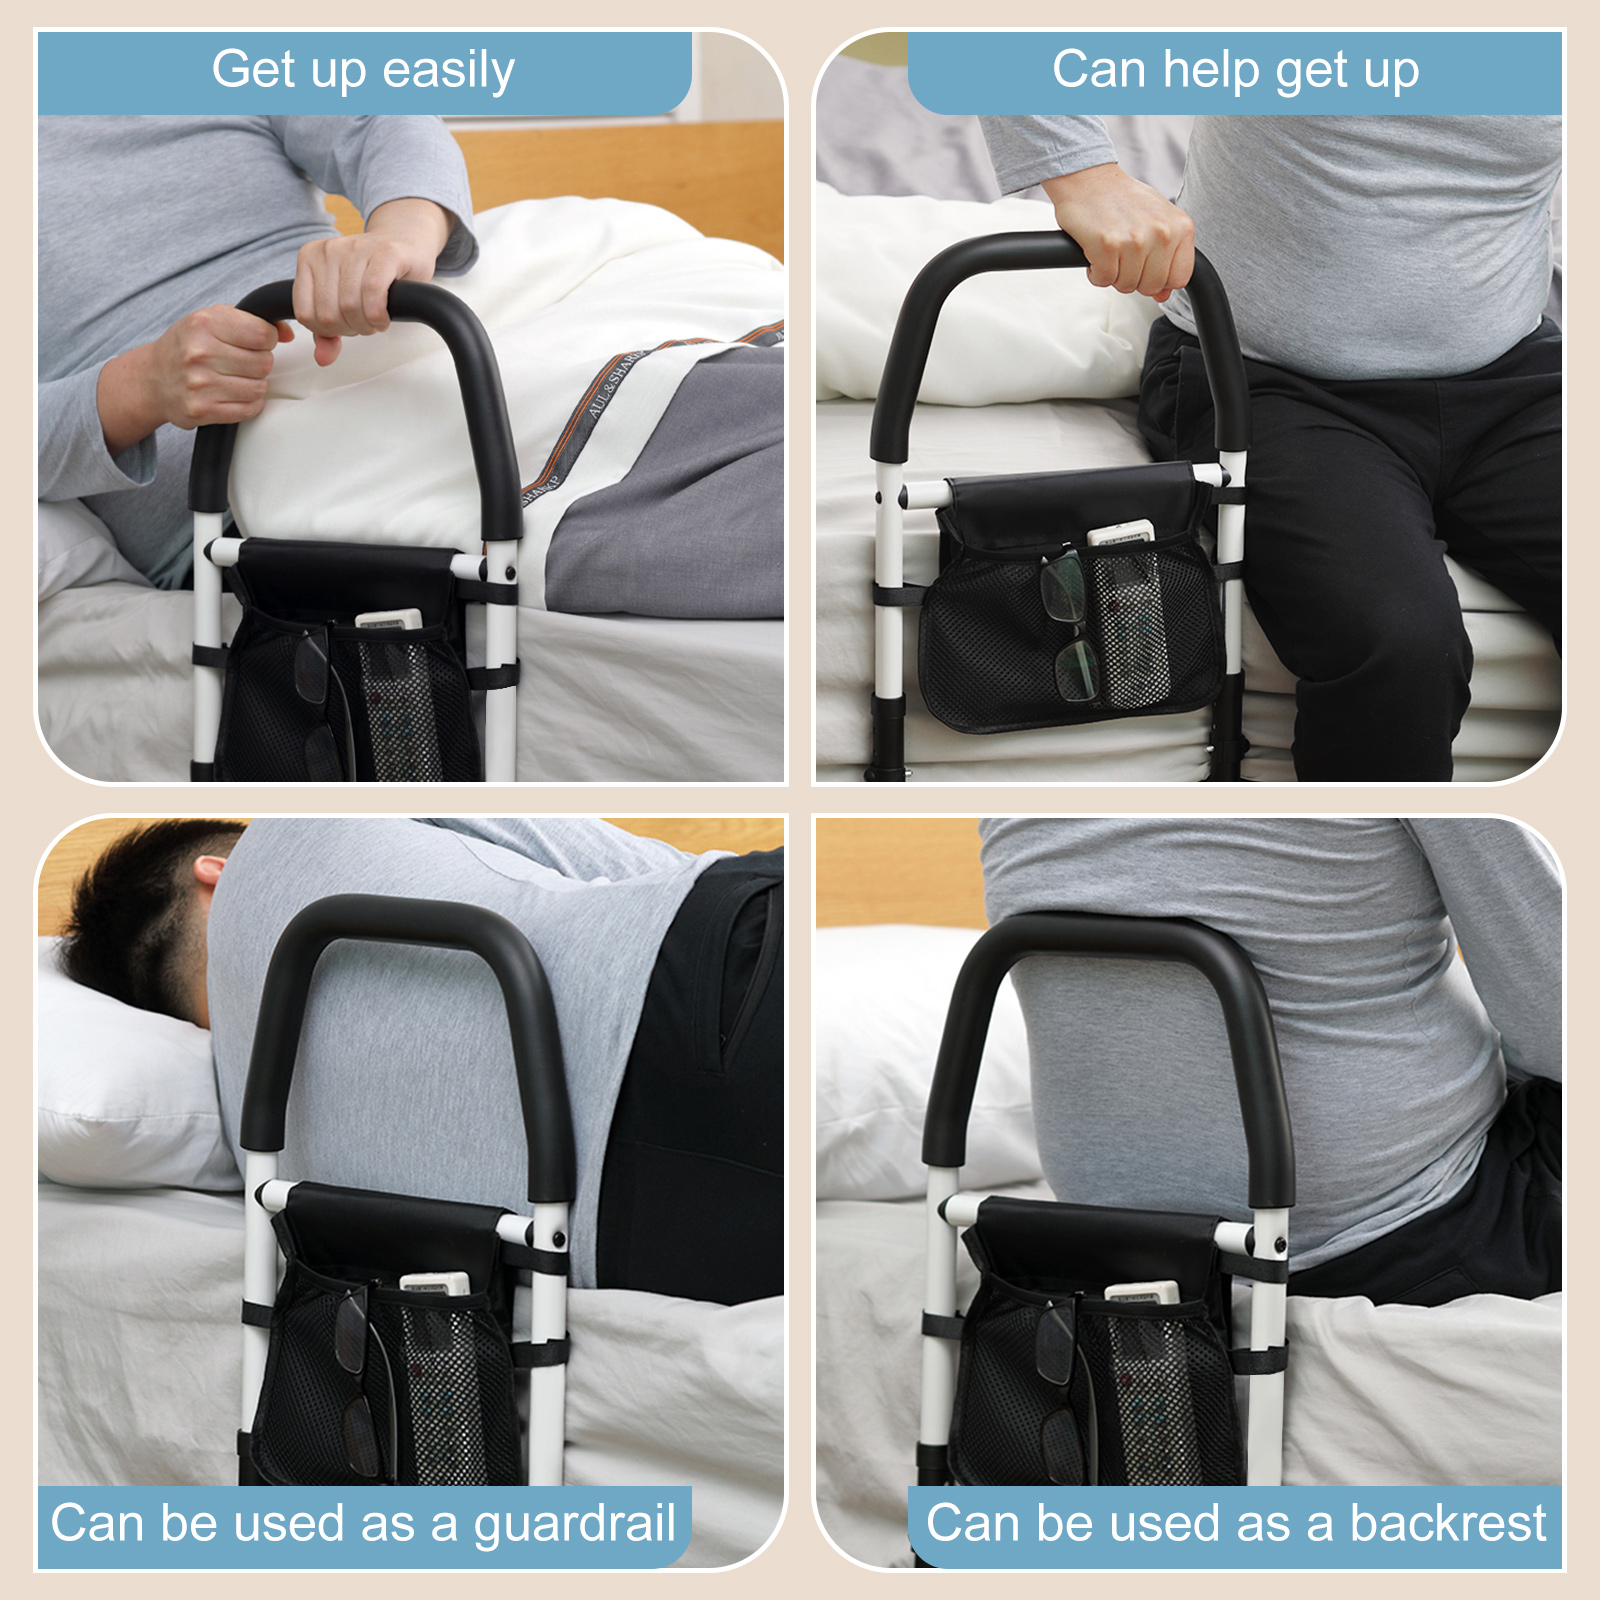 Bed-Rails-for-Elderly-Adults-Safety-Bed-Assist-Rail-for-Handicap-Seniors-Pregnant-Bed-Assist-Grab